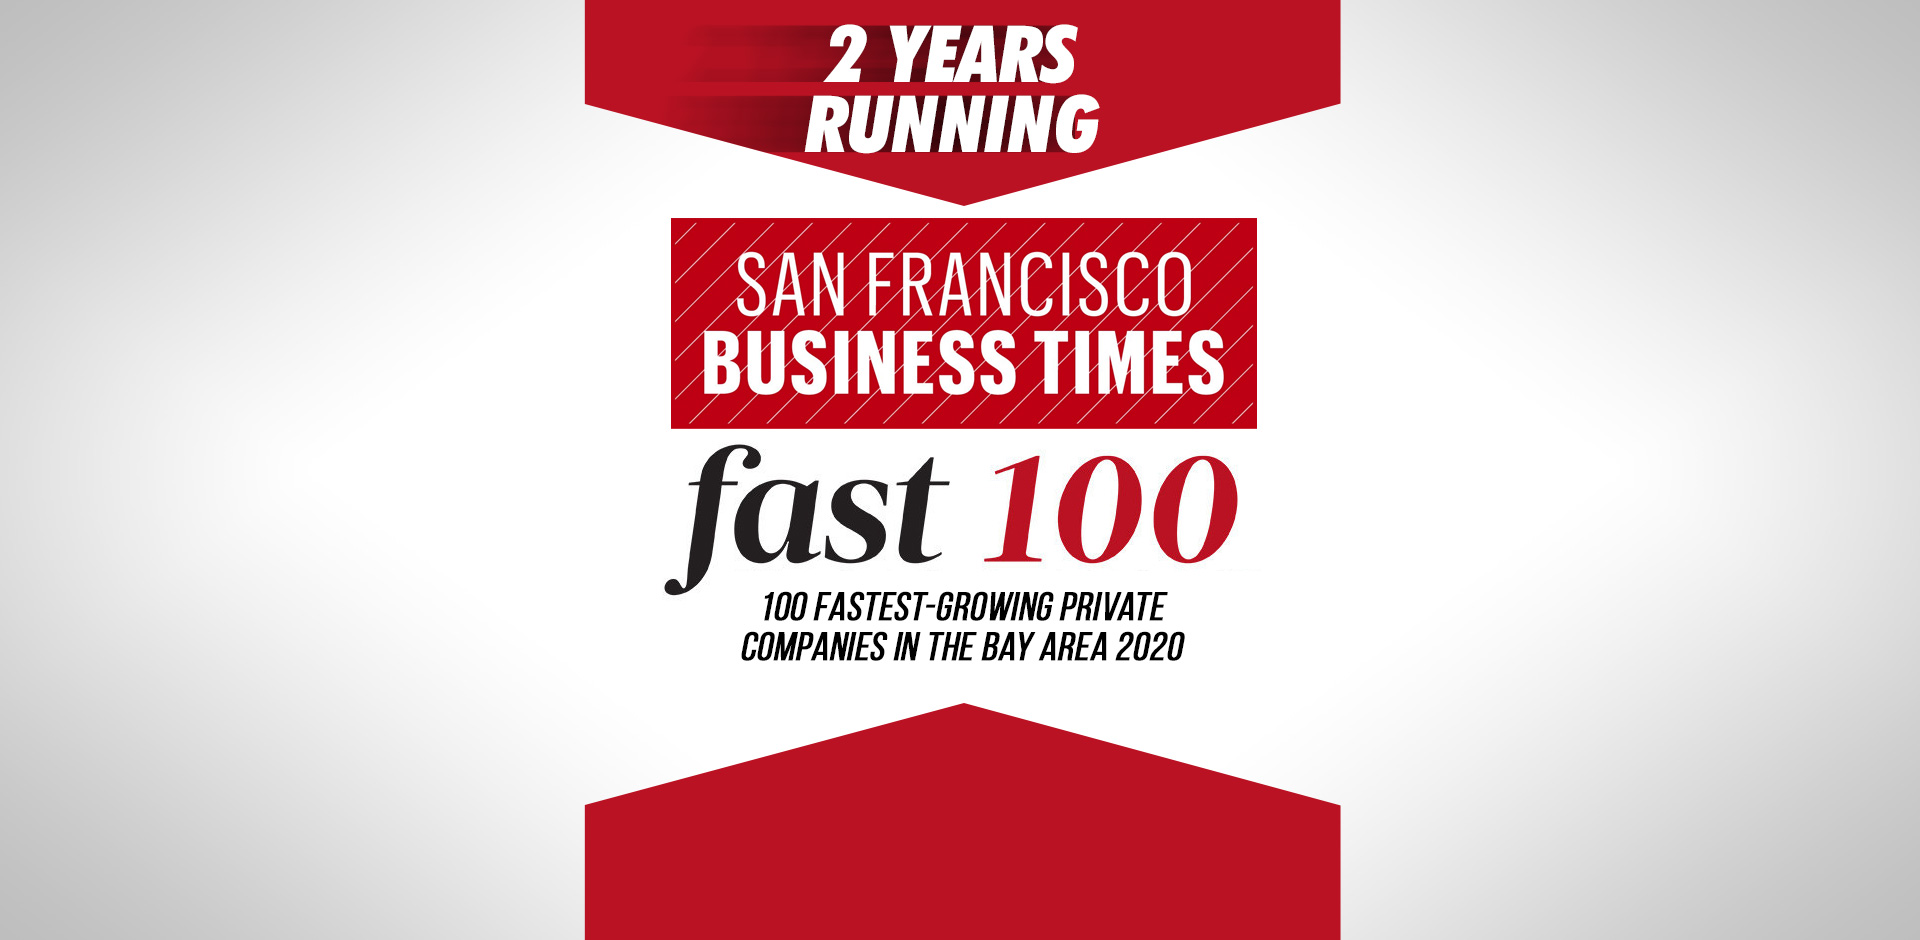 Consumer Acquisition Named a Top 100 Fastest-Growing Private Company in Bay Area by San Francisco Business Times